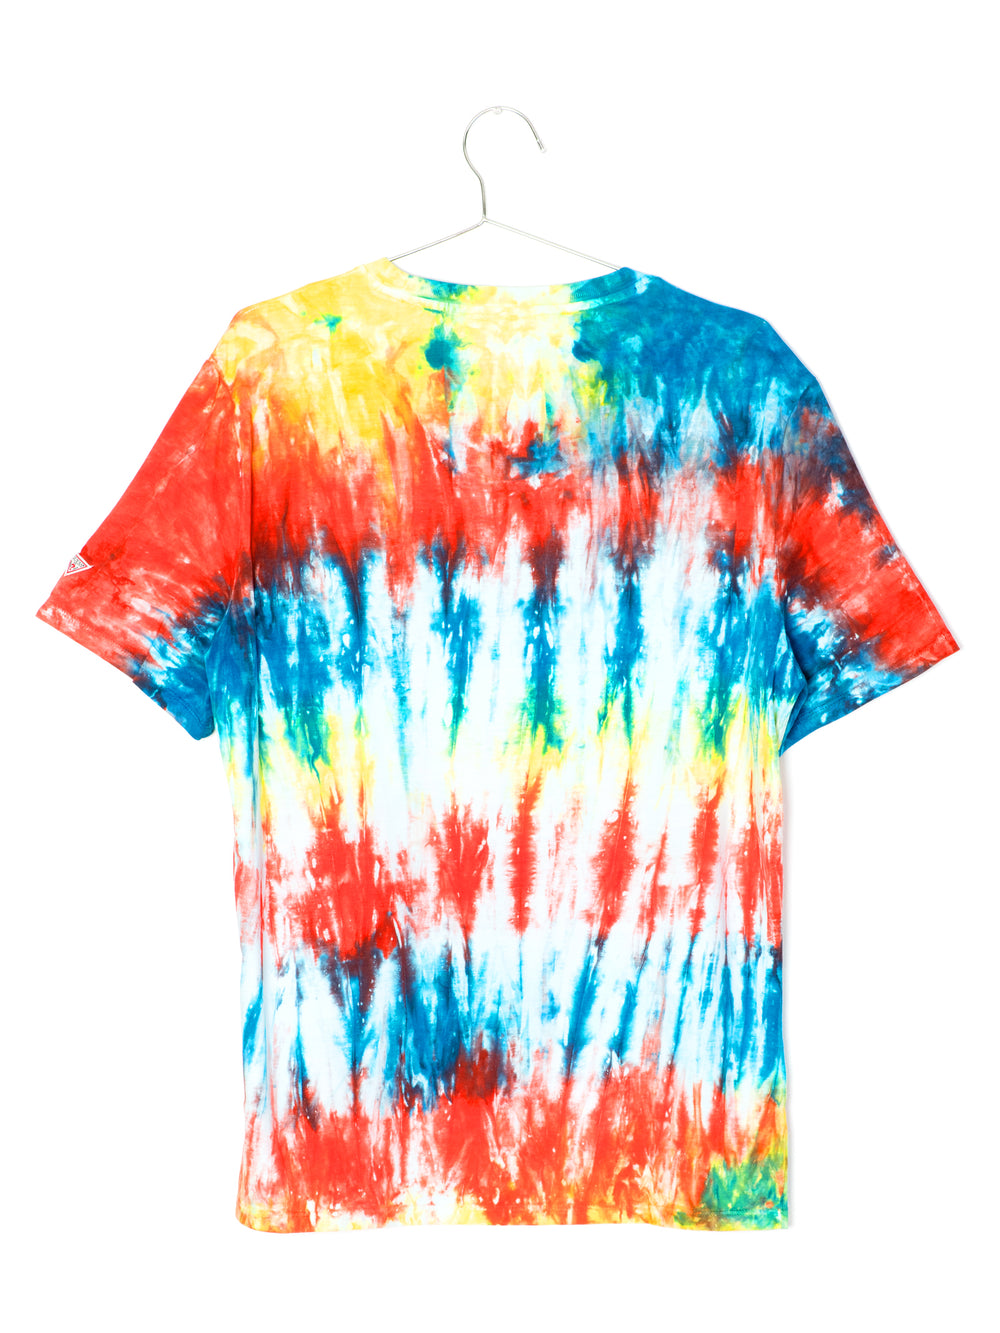 MENS GUESS MULTI TIE DYE S/S T - CLEARANCE